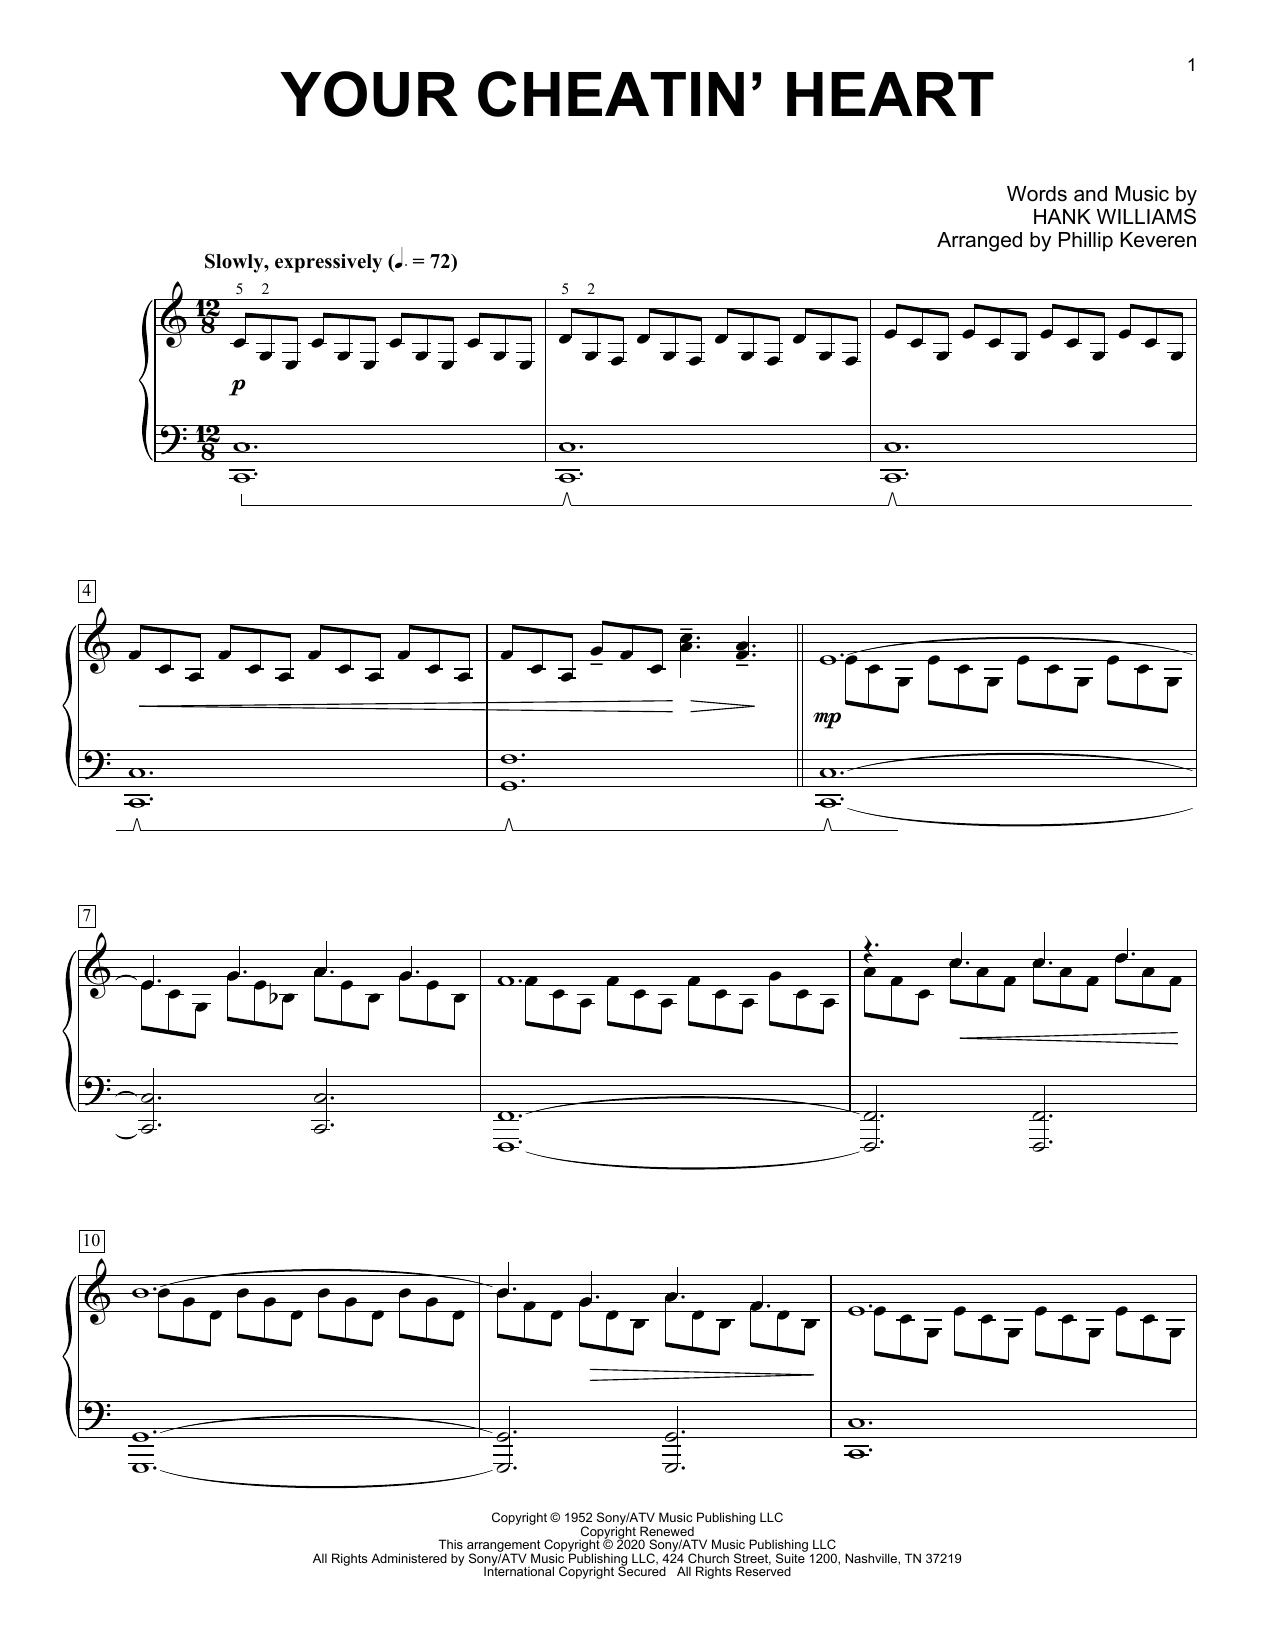 Download Hank Williams Your Cheatin' Heart [Classical version] Sheet Music